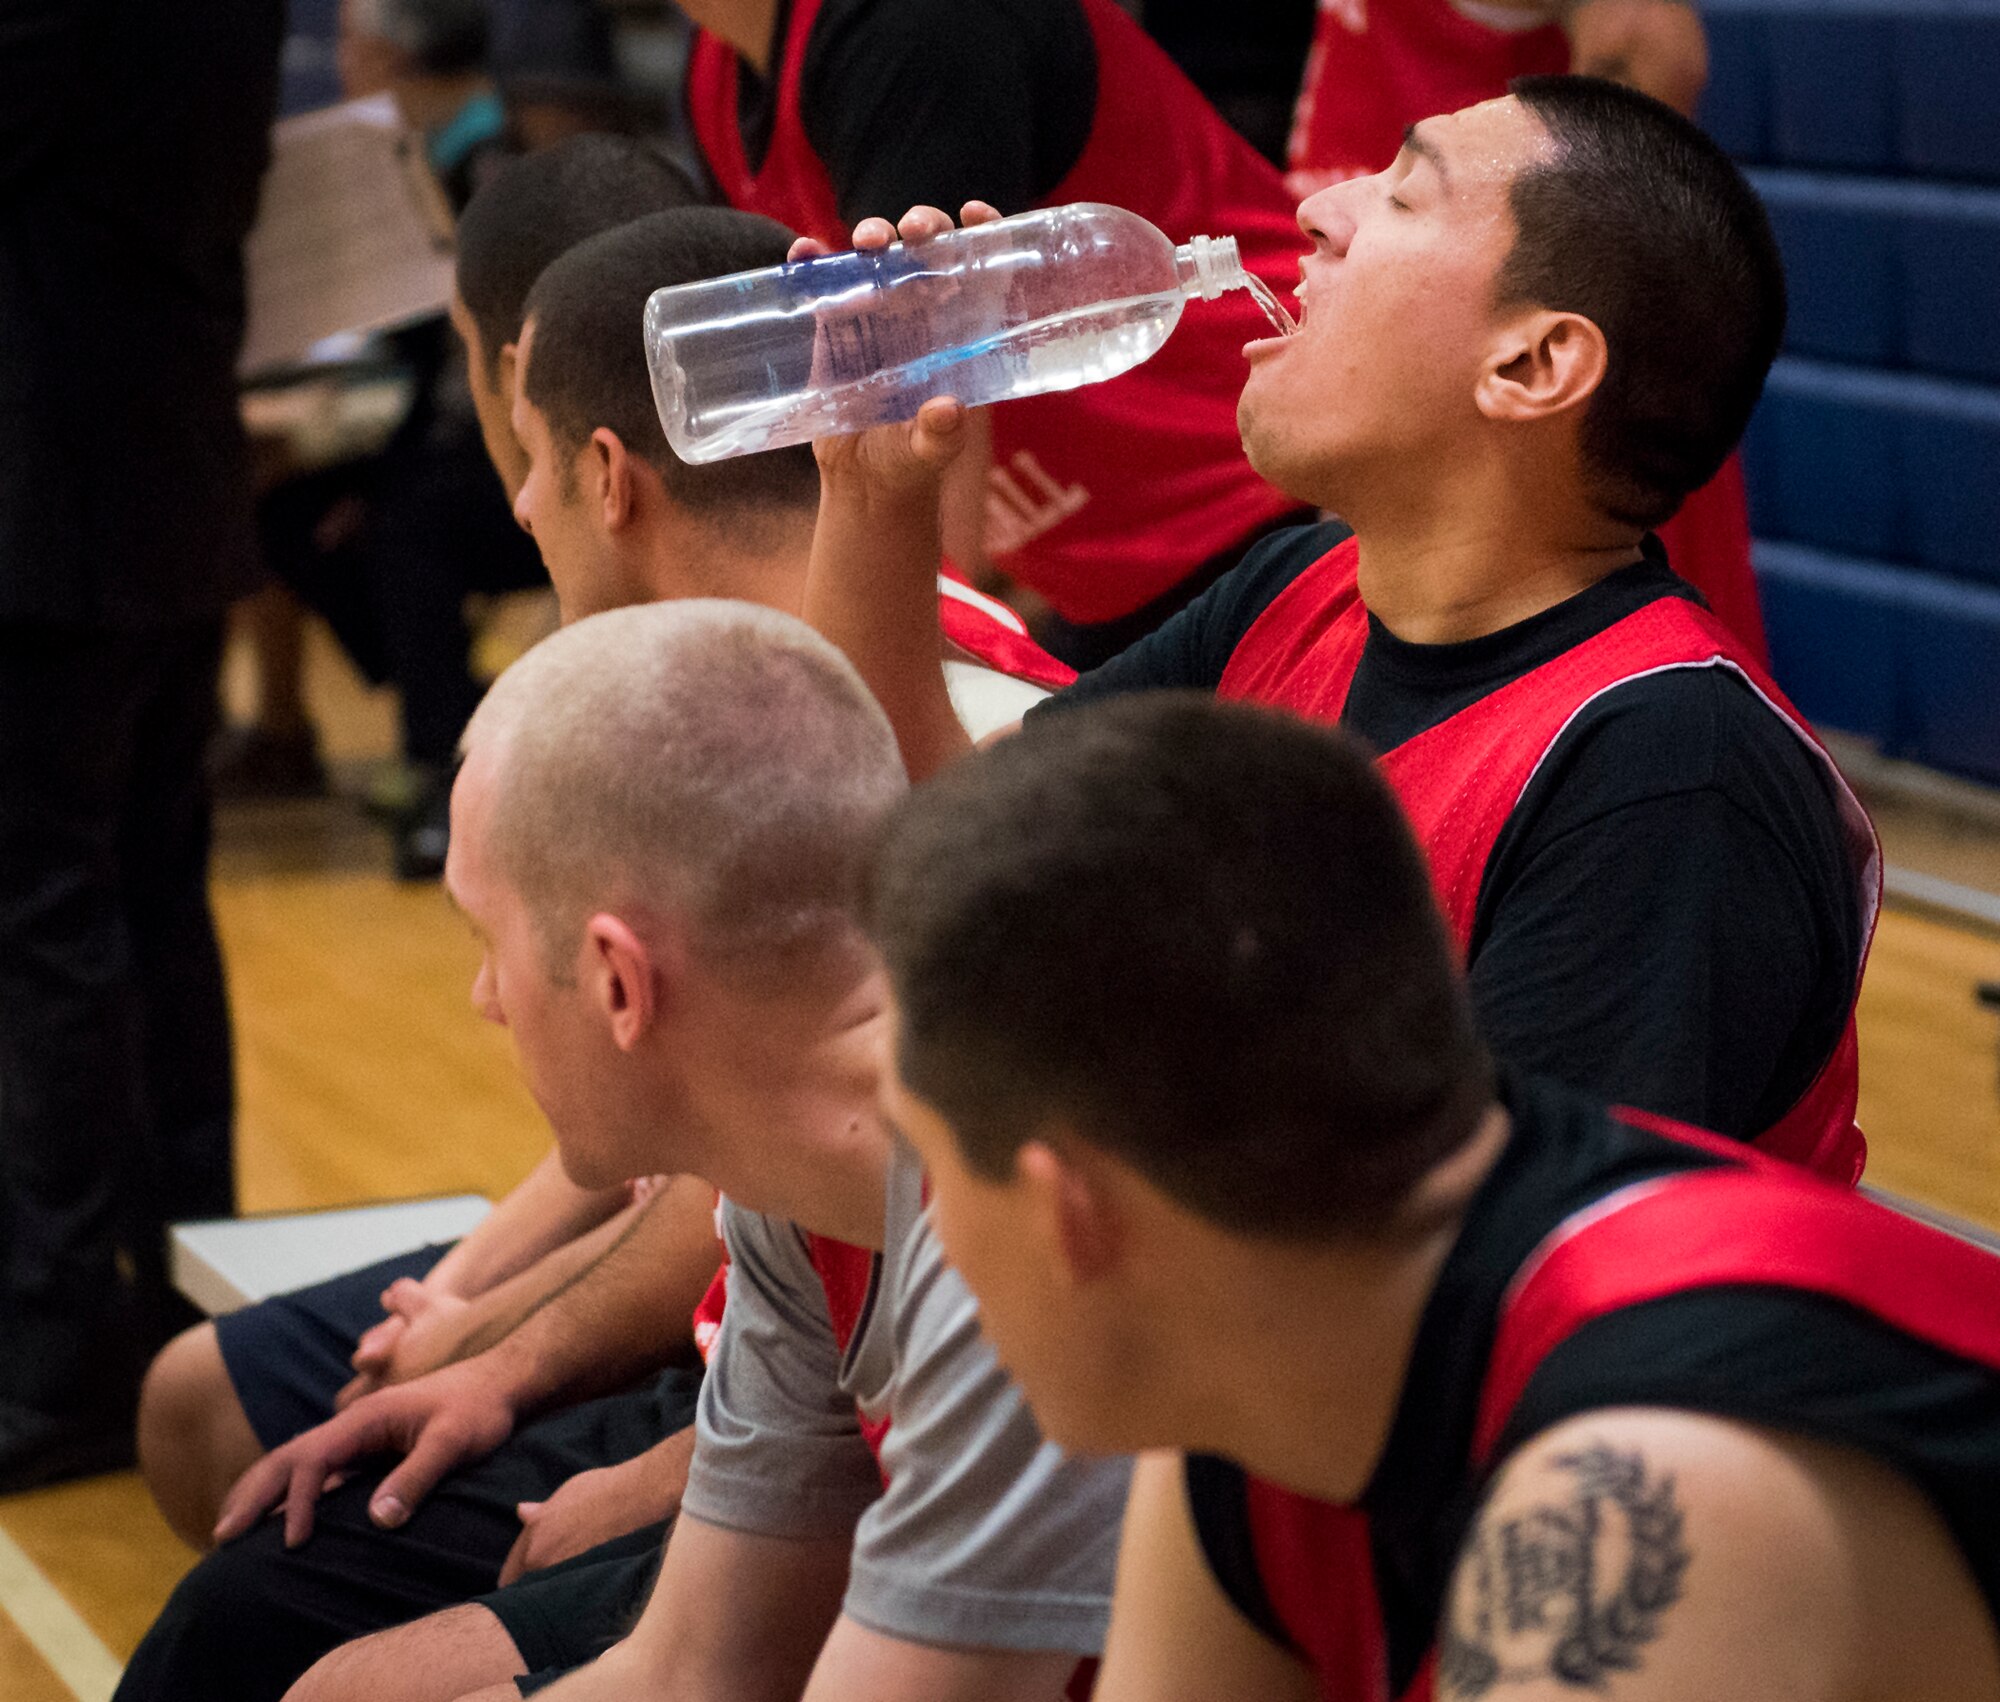 A Medical Group Black player takes a quick water break on the bench during an intramural basketball game against the Maintenance Squadron team at Eglin Air Force Base, Fla., Jan. 12.  The MDG team won easily 30 to 25 in their first game of the new intramural season.  (U.S. Air Force photo/Samuel King Jr.)